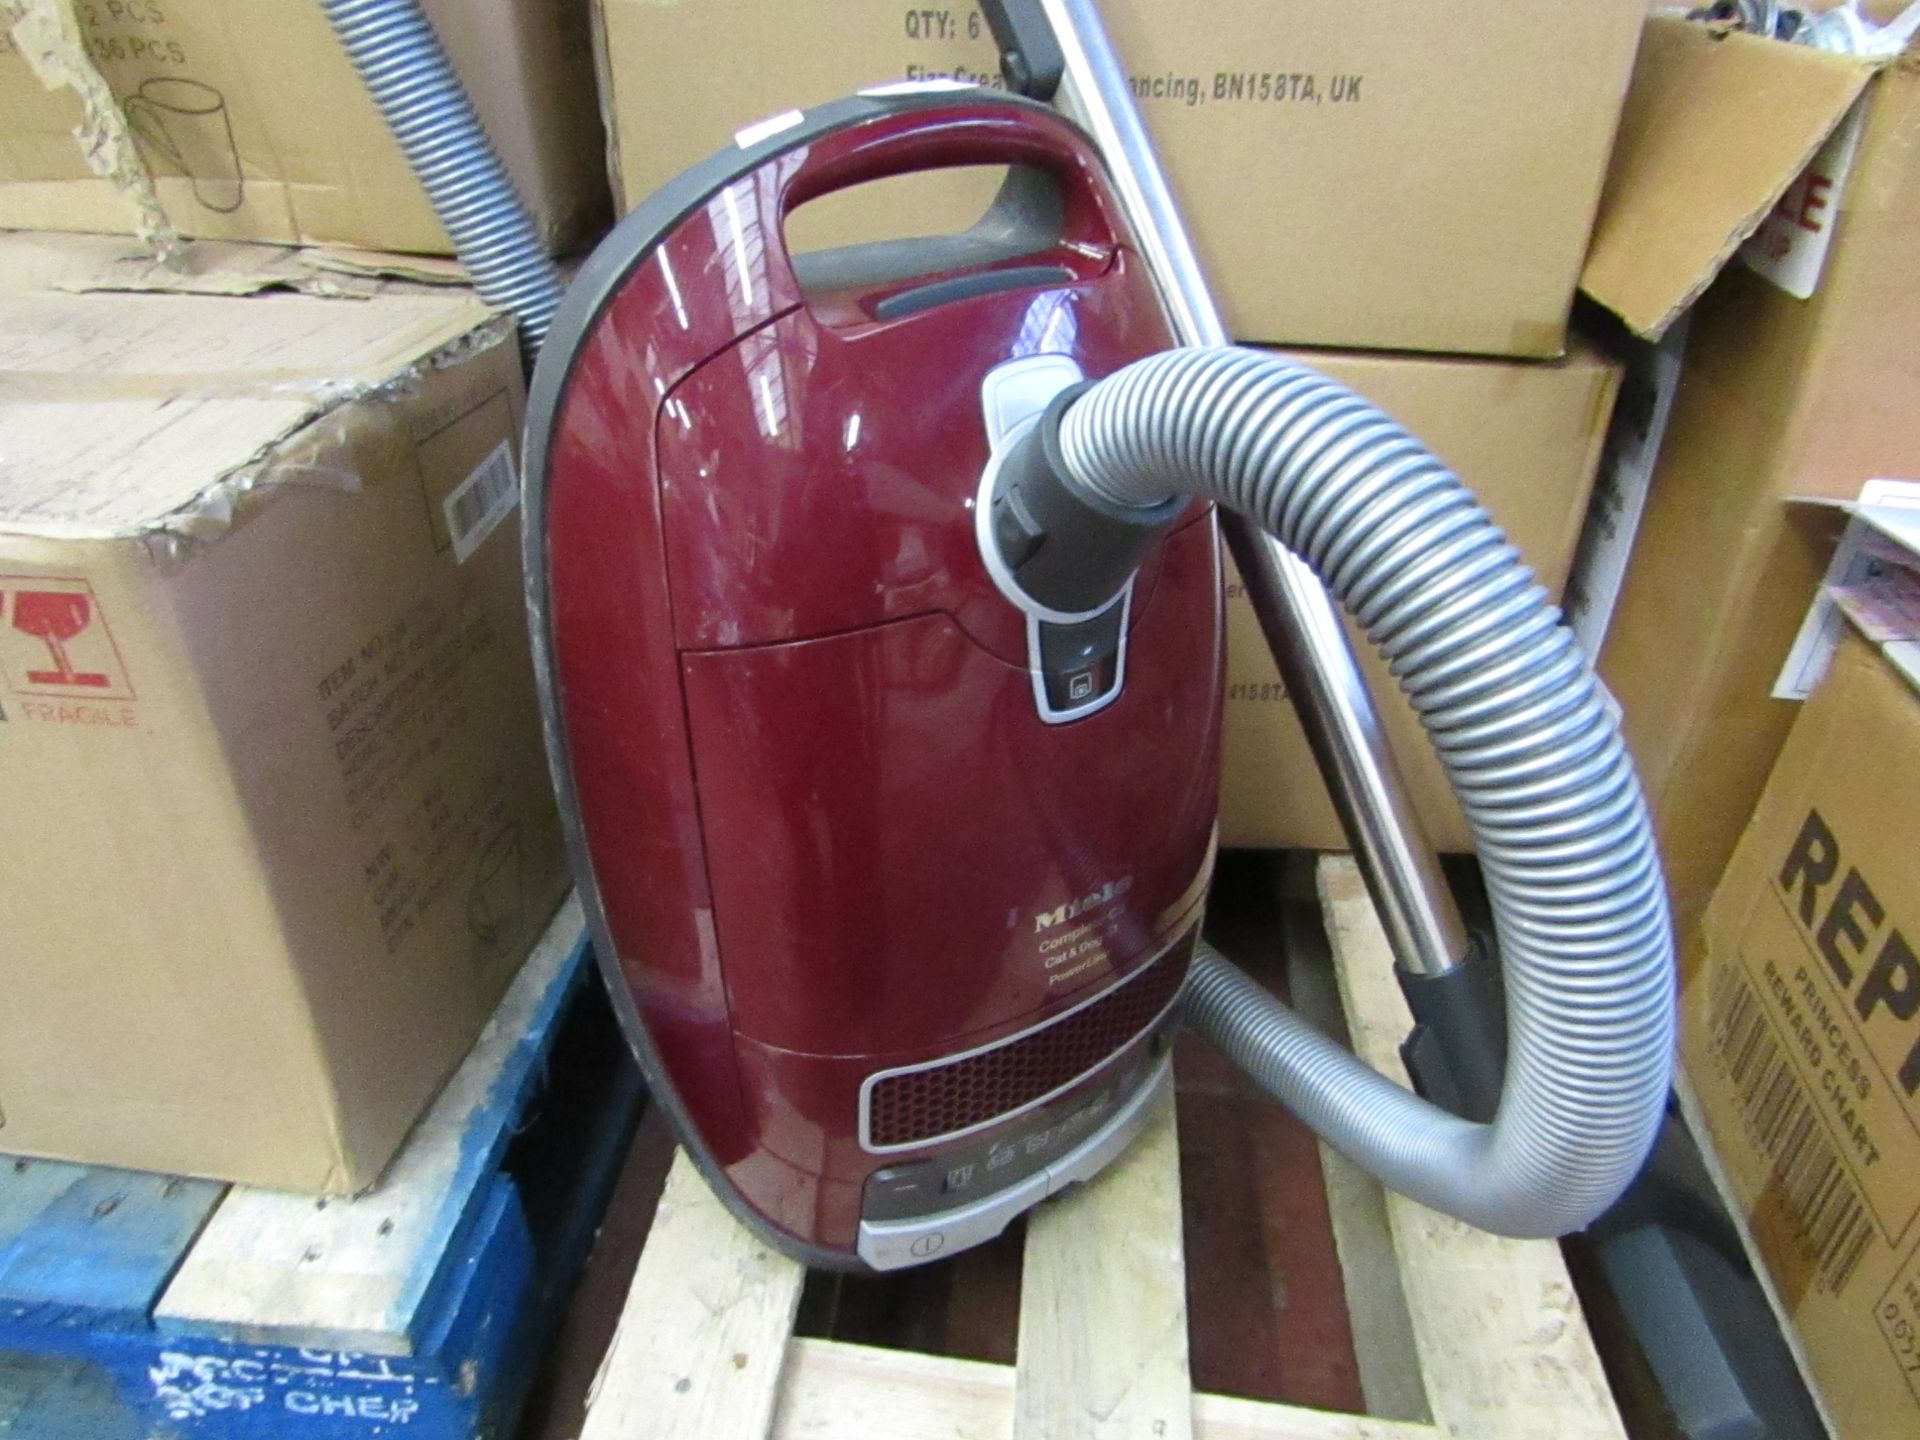 Miele compact cat and dog powerline vacuum cleaner, untested.